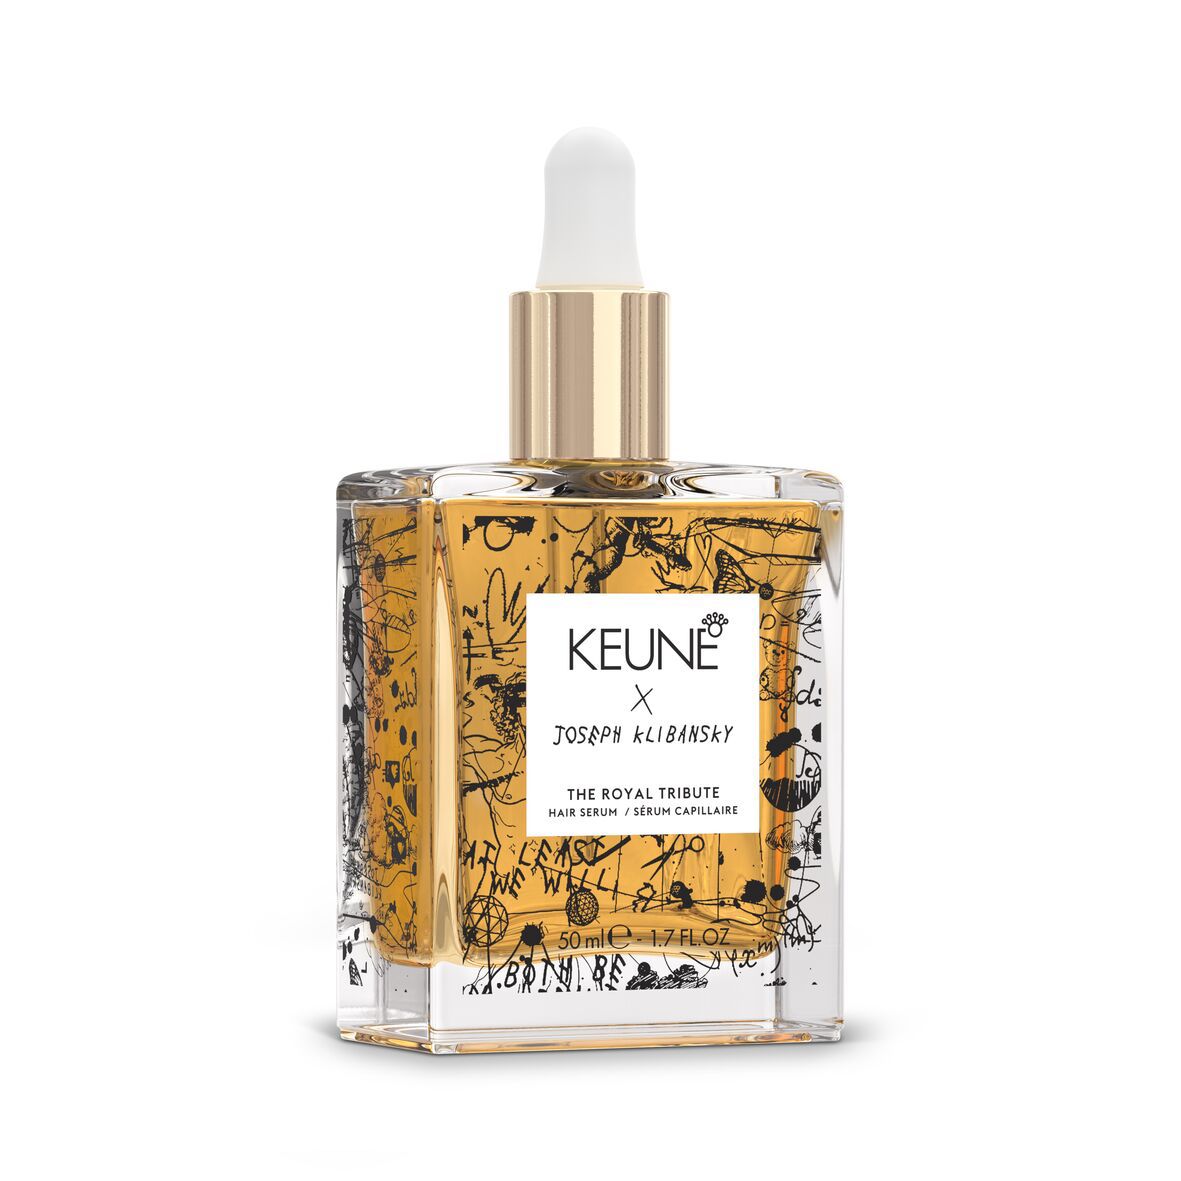 Royal Tribute Hair Serum provides brilliant shine to your hair while effectively combating frizz. A luxurious hair care product with the scent of tulips and Vitamin E. Now available on keune.ch.